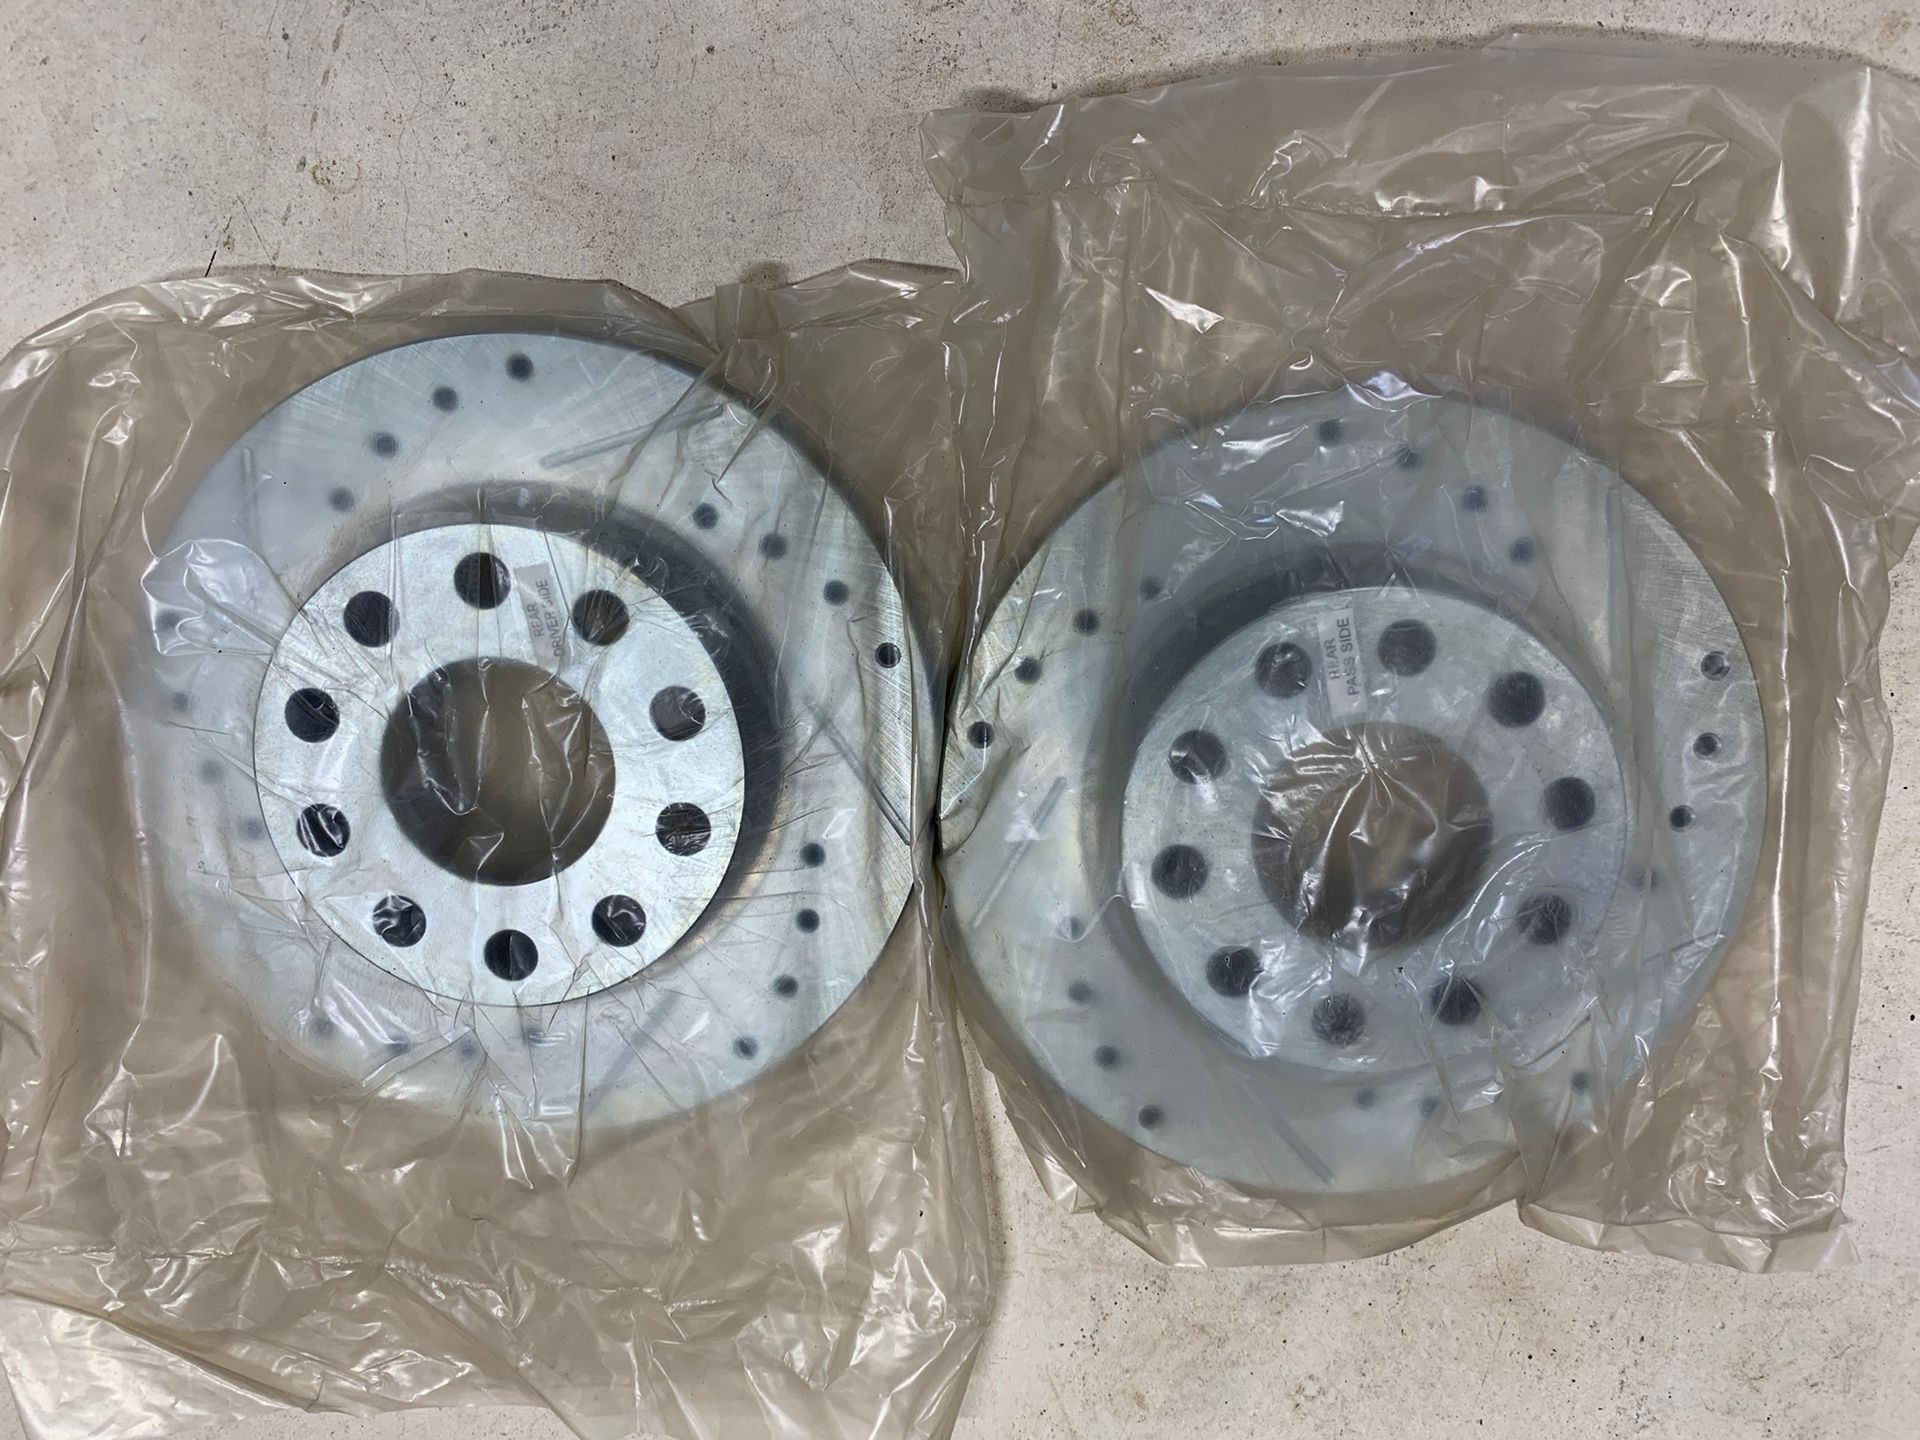 02 - 06 Audi A4 Drilled Slotted Rear Brake Rotors Pair New Powerstop EBR656